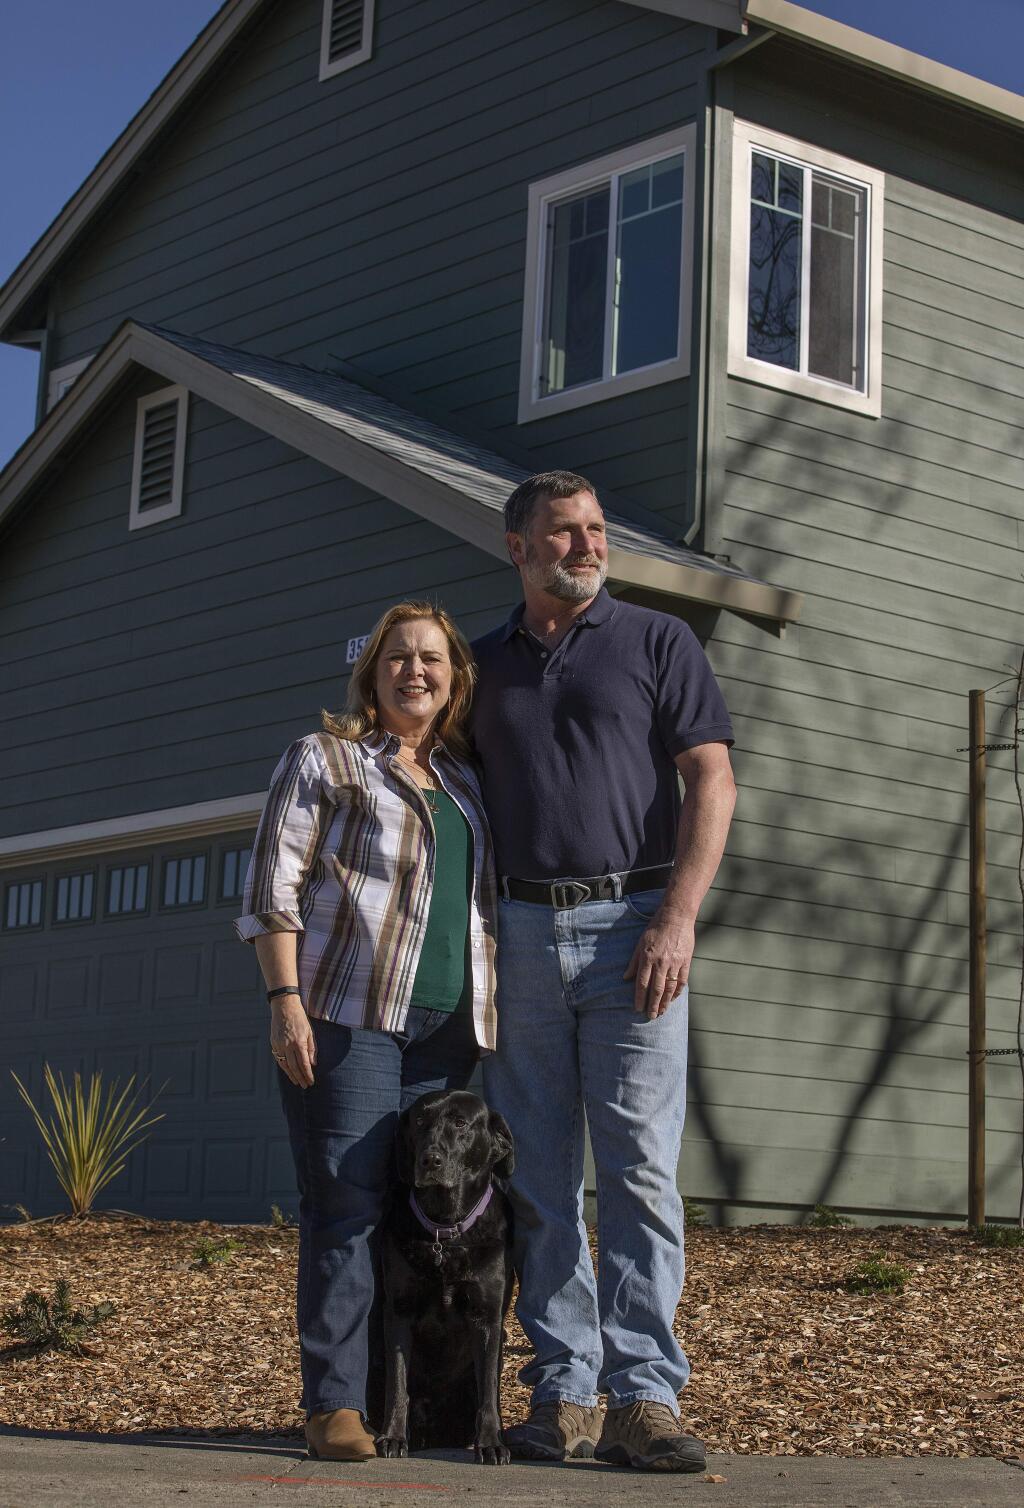 Laurel and Gary Quest recently moved back into their rebuilt home in Coffey Park. (photo by John Burgess/The Press Democrat)